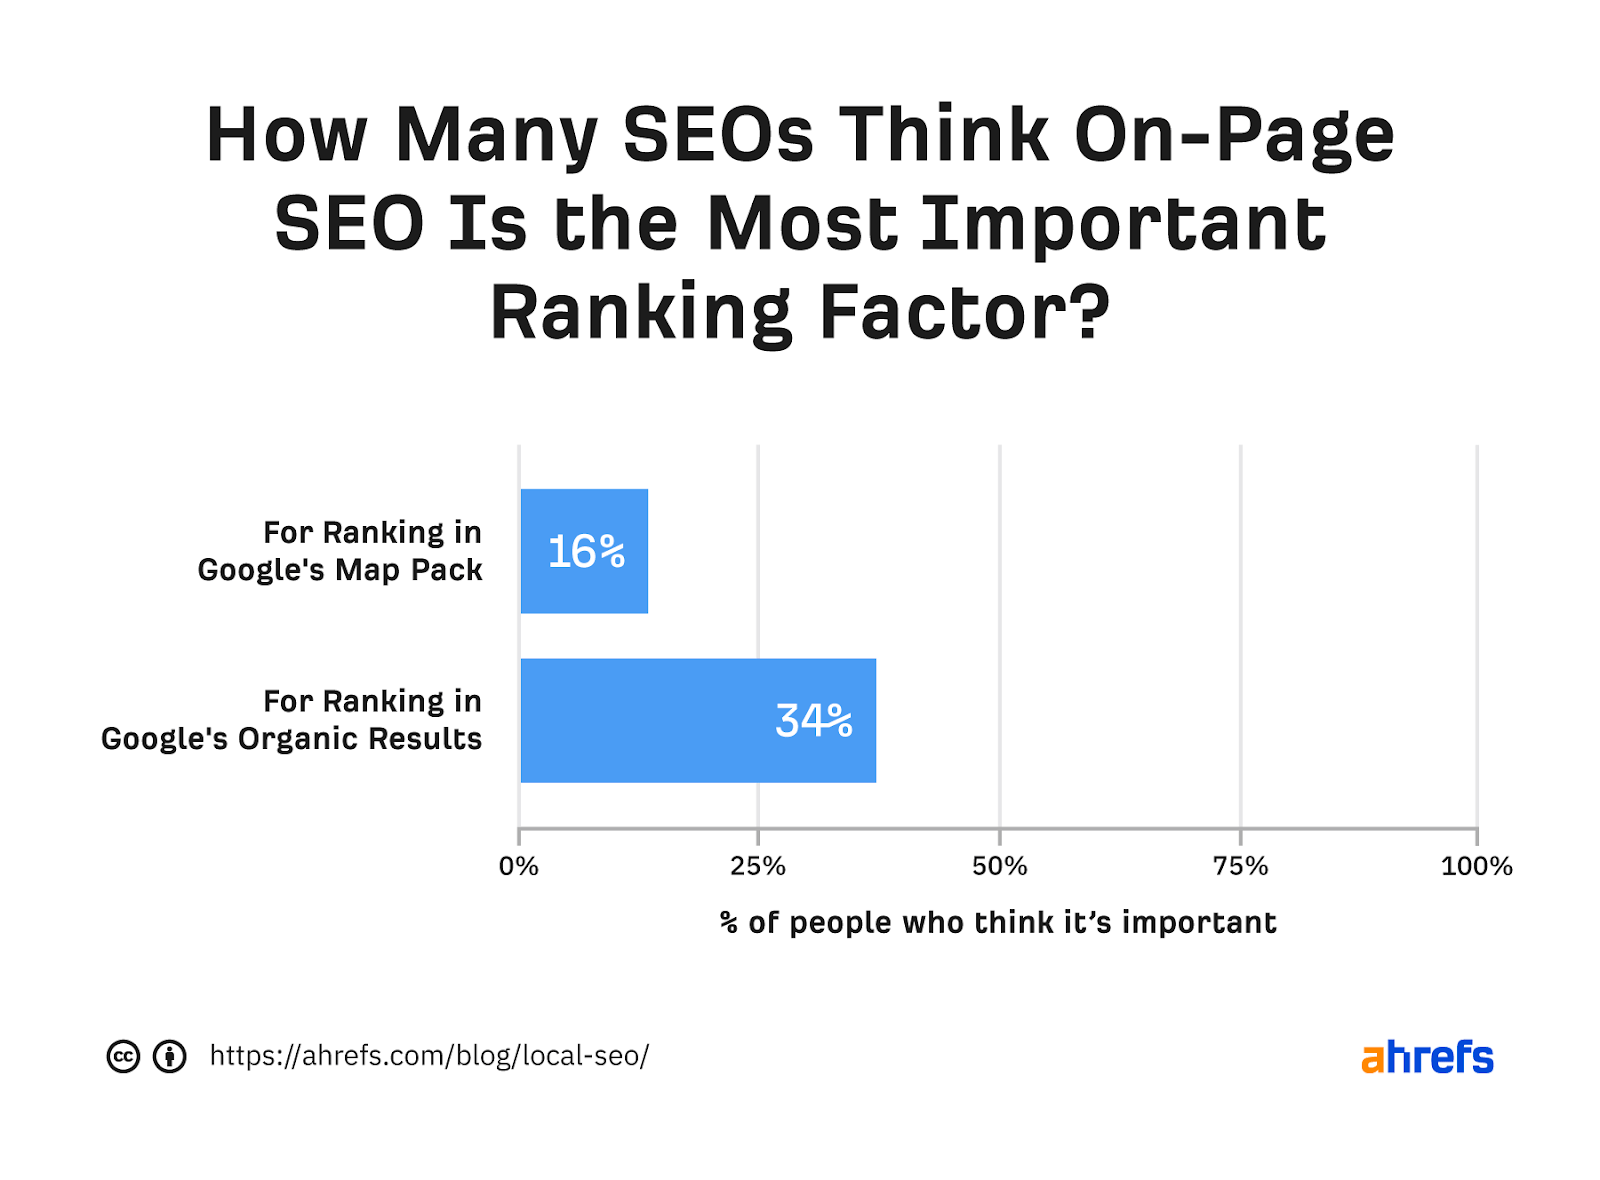 Bar graph showing percentage of SEOs who think on-page SEO is most important ranking factor for "map pack" and "regular" results, respectively 